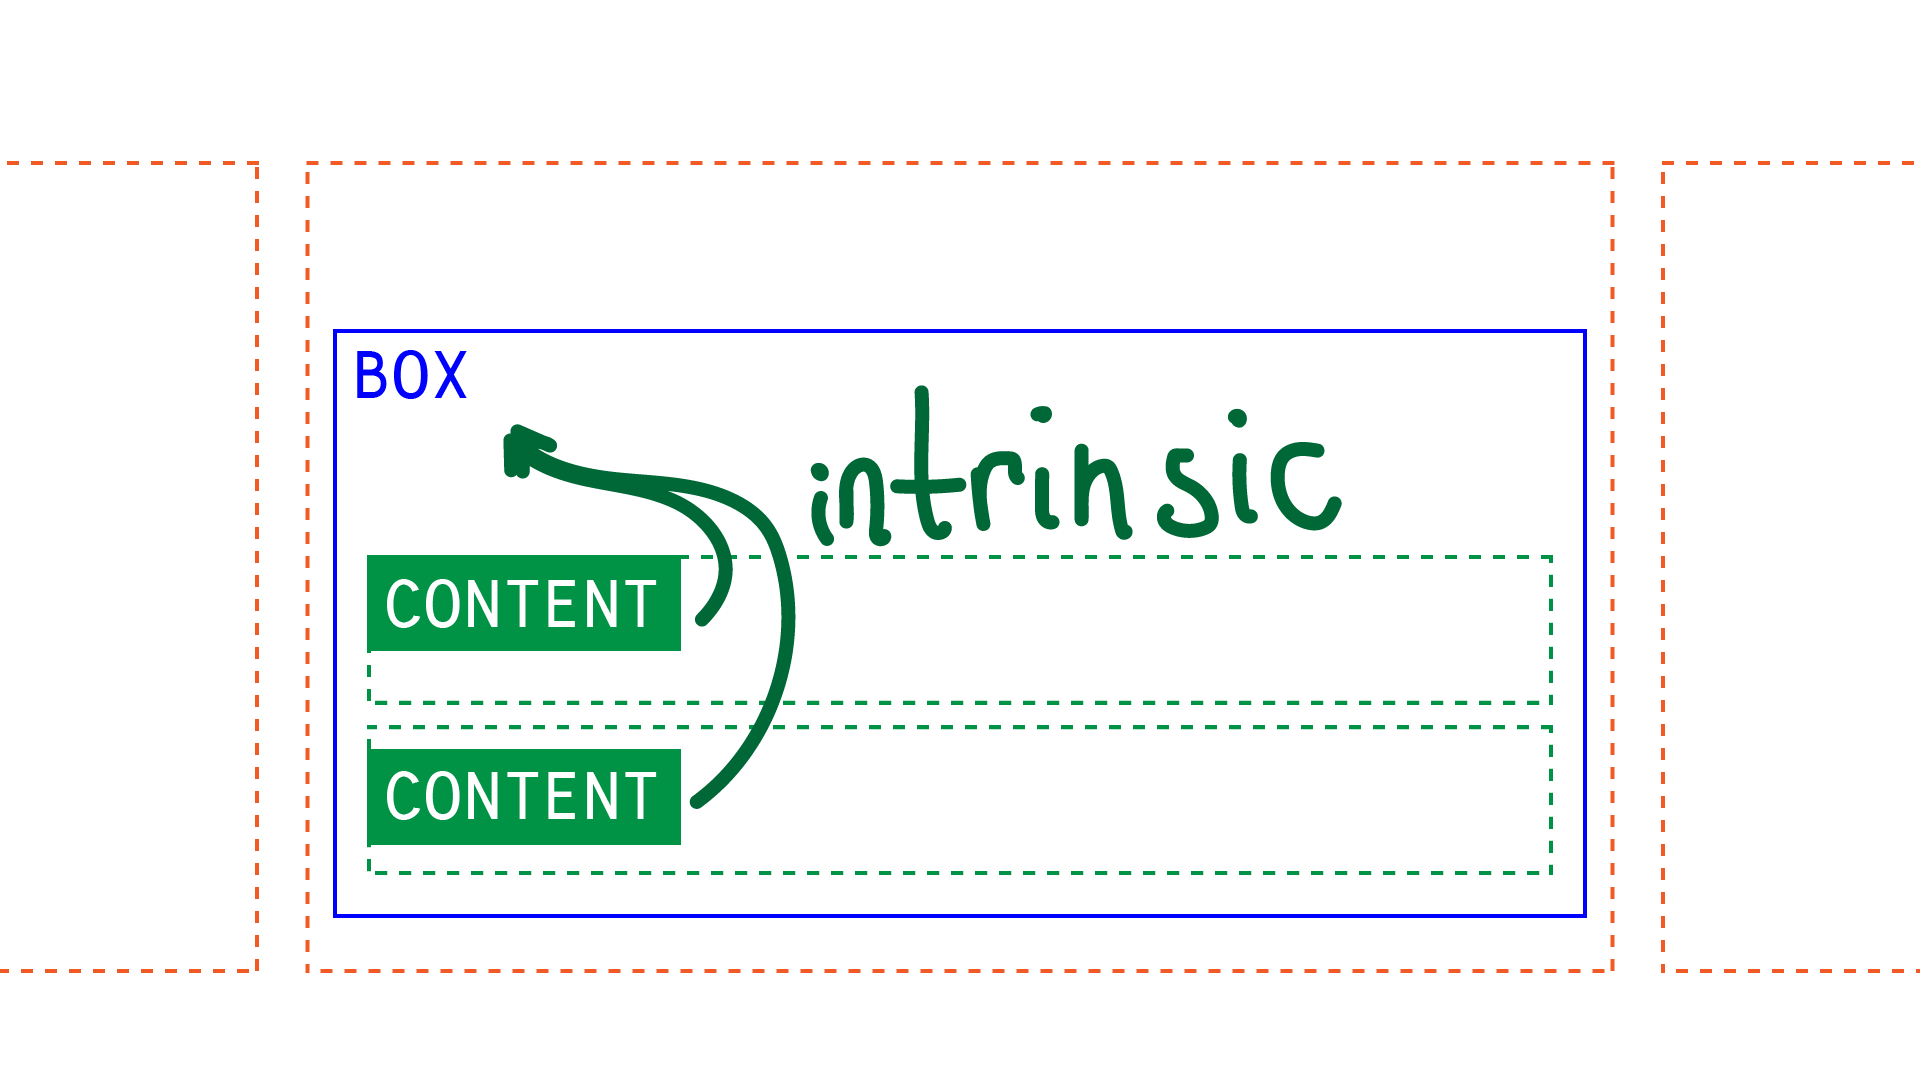 Boxes inside labeled 'content', provide 'implicit' sizing to the box
